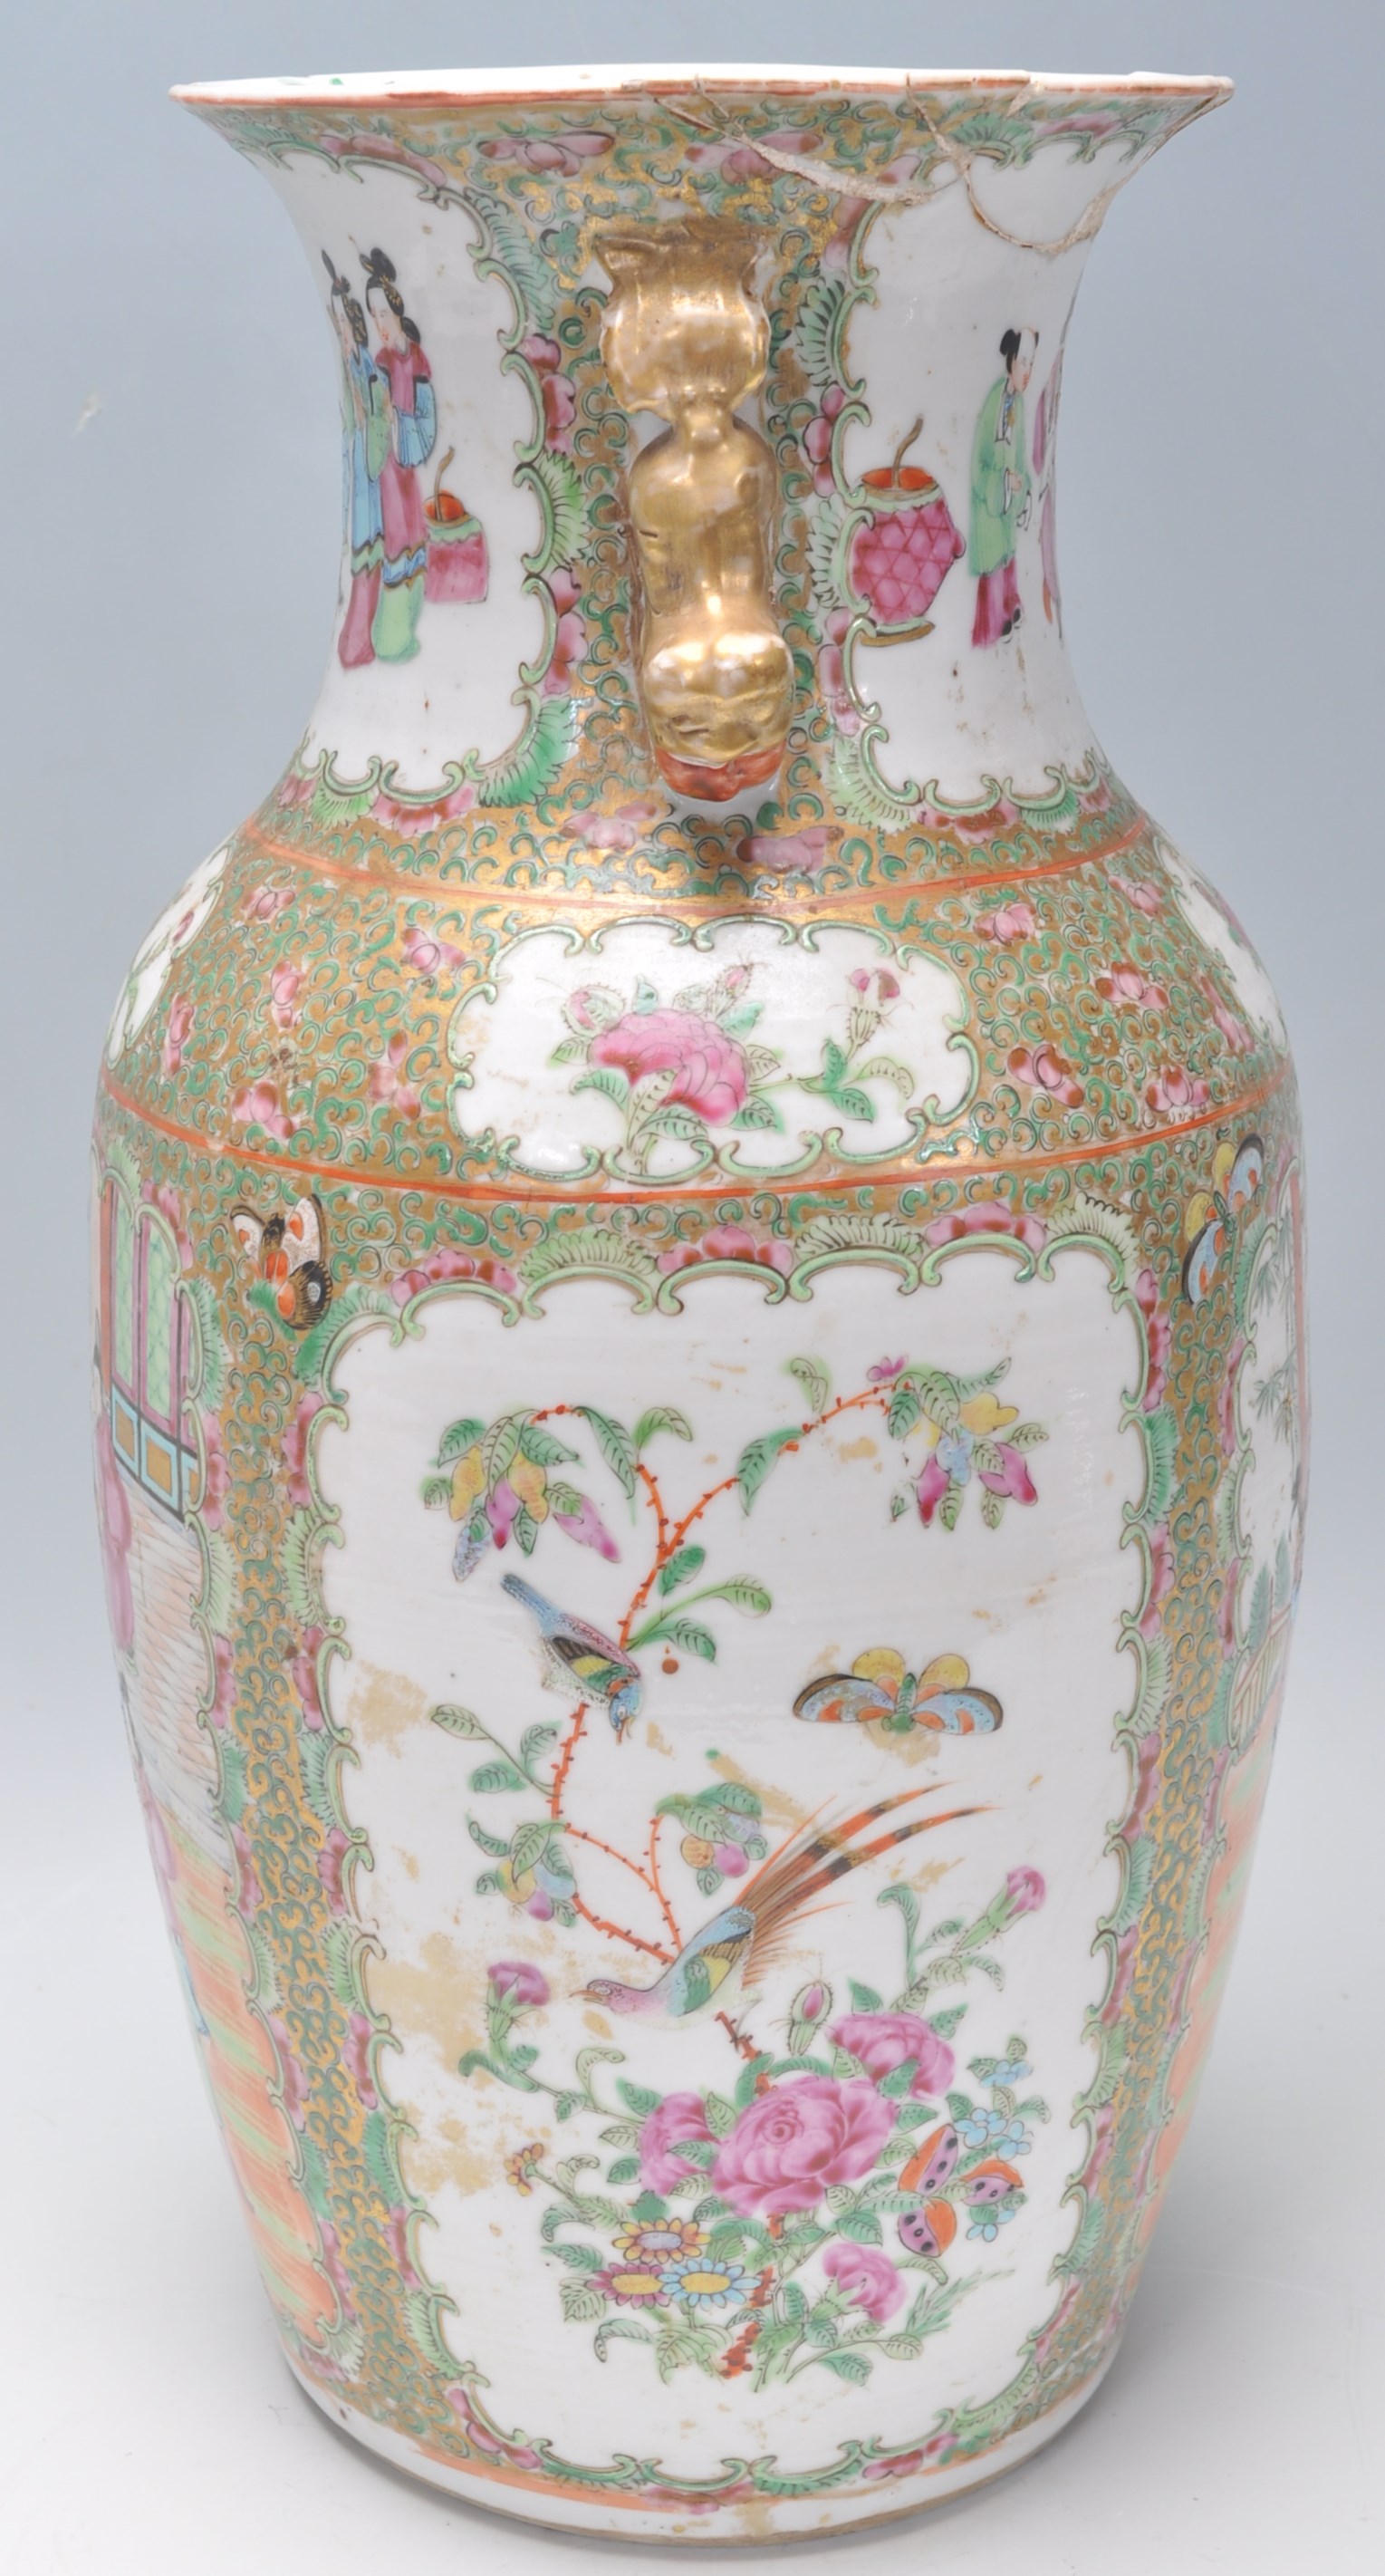 A 19th Century Chinese Cantonese famille rose vase with handpainted scenes of people, birds and - Image 5 of 10